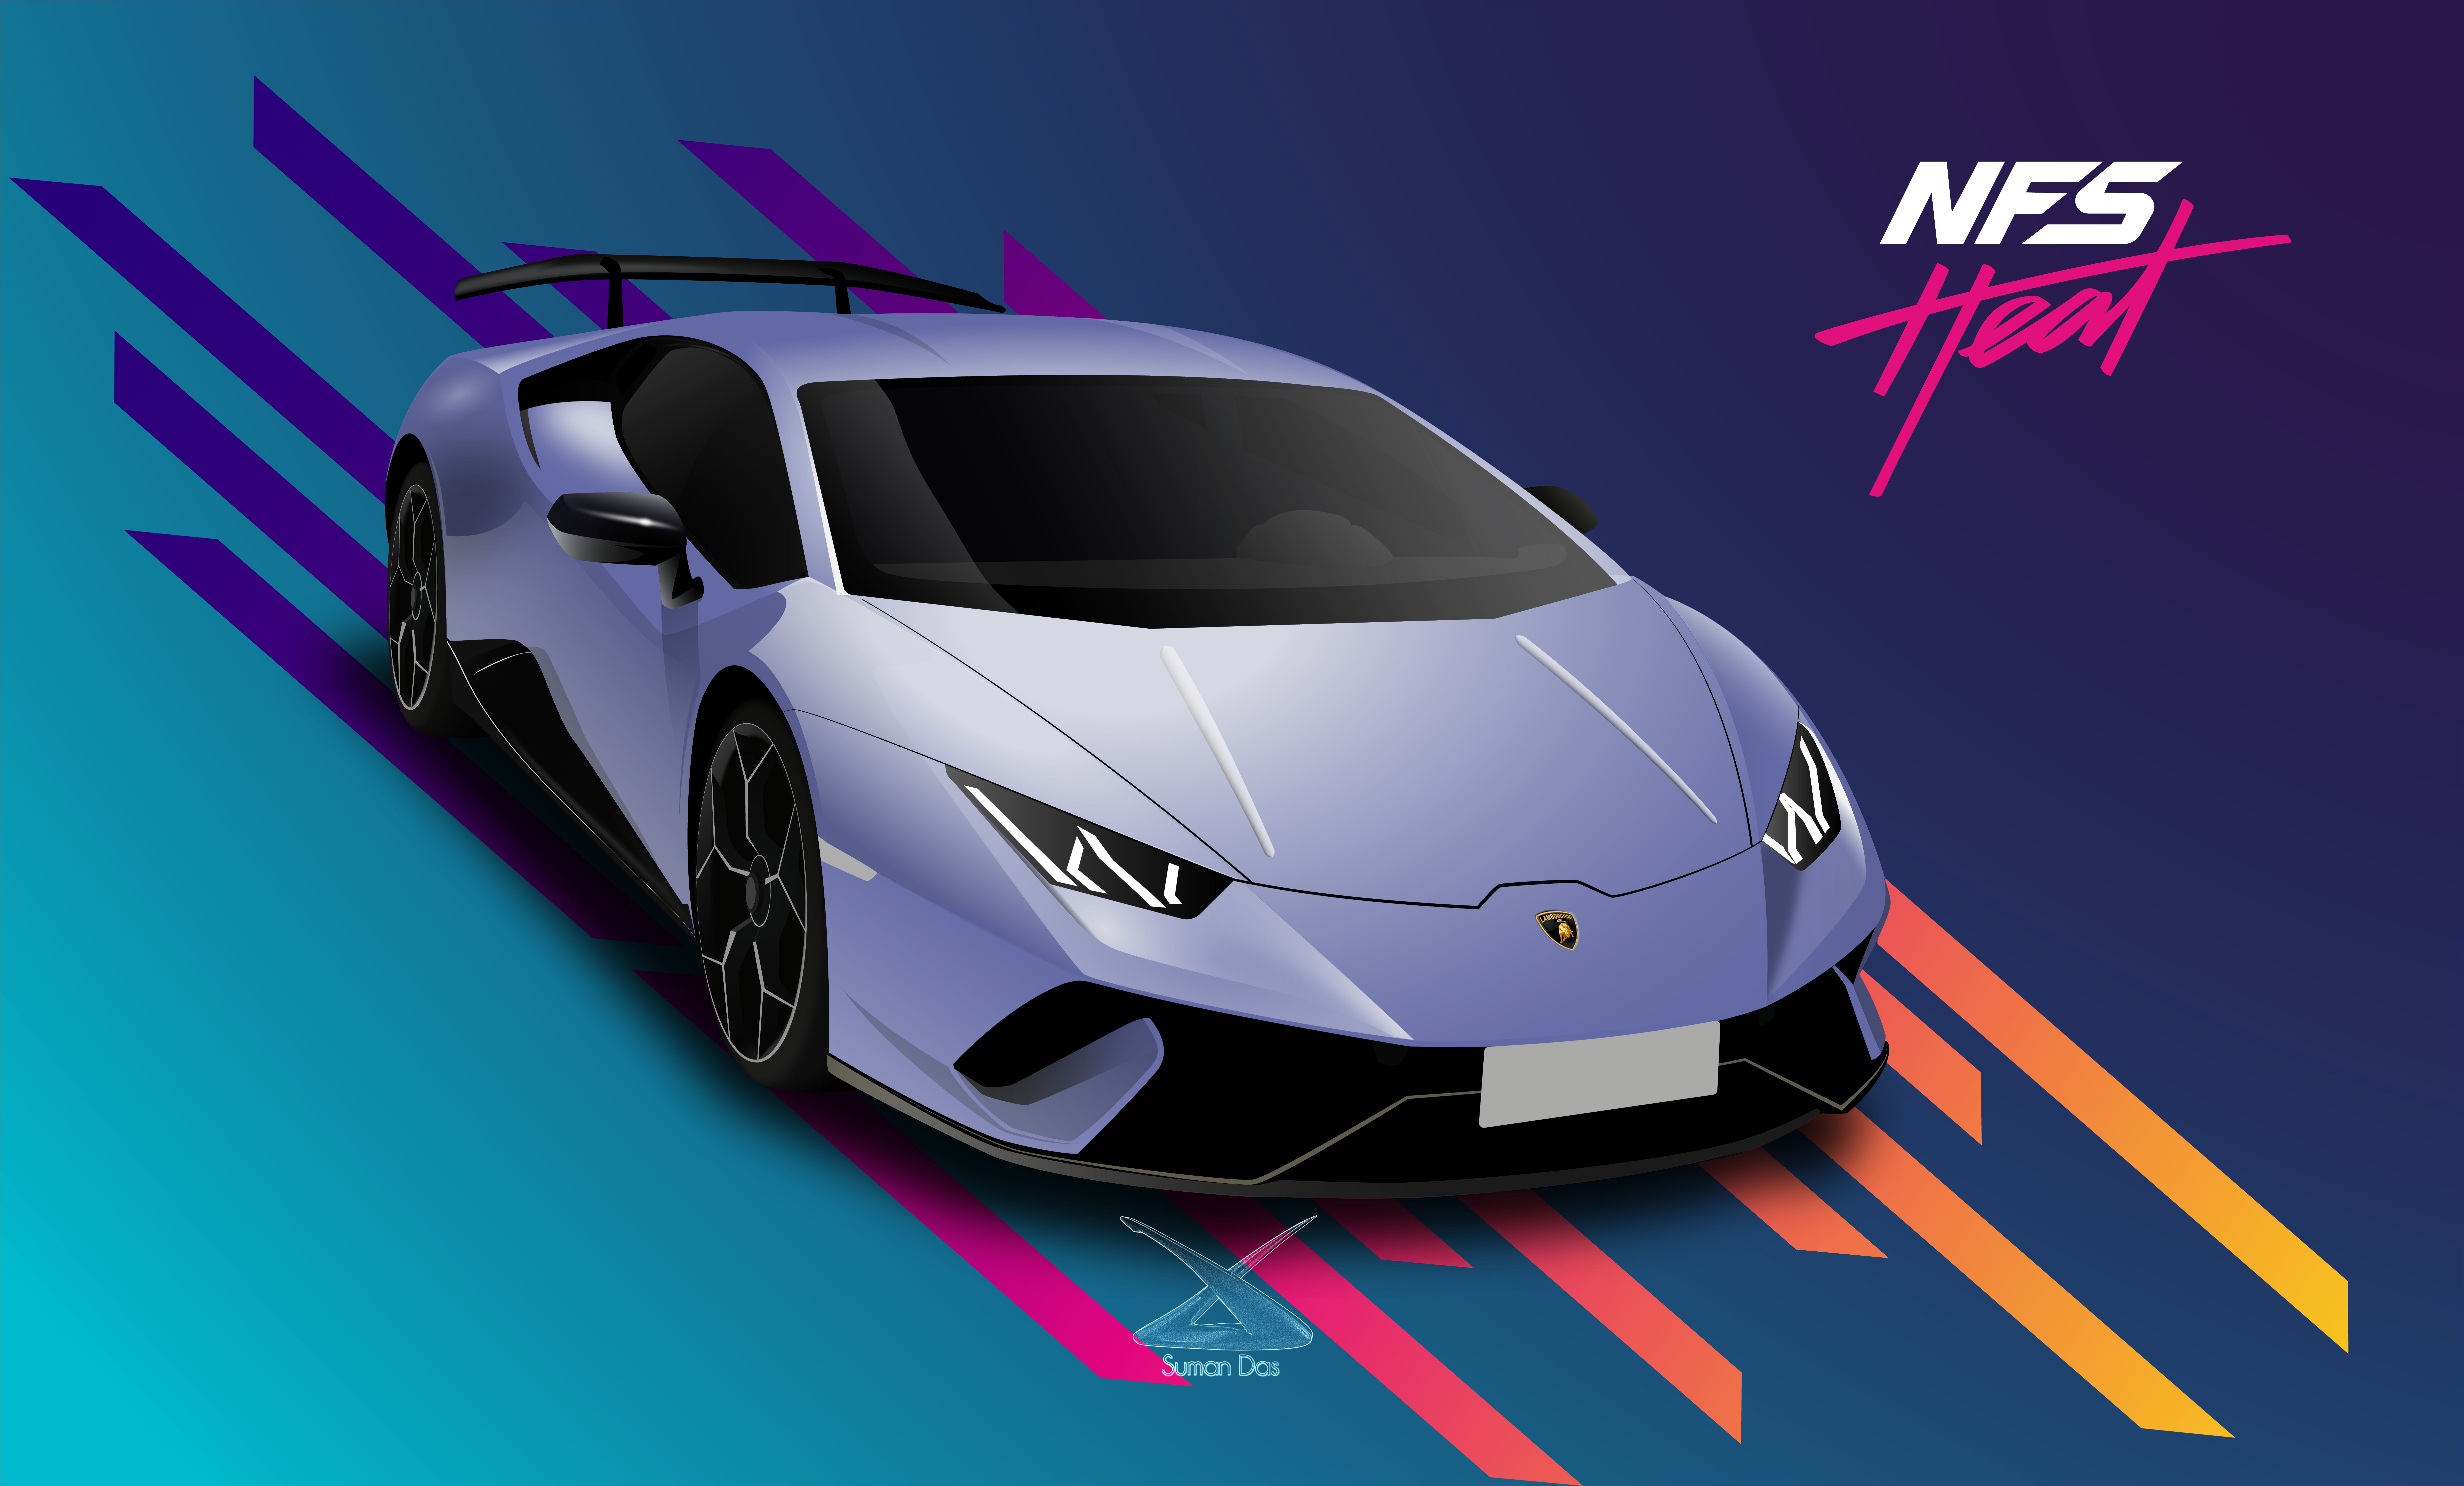 Lamborghini Huracan Performante wallpapers for desktop, download free  Lamborghini Huracan Performante pictures and backgrounds for PC 